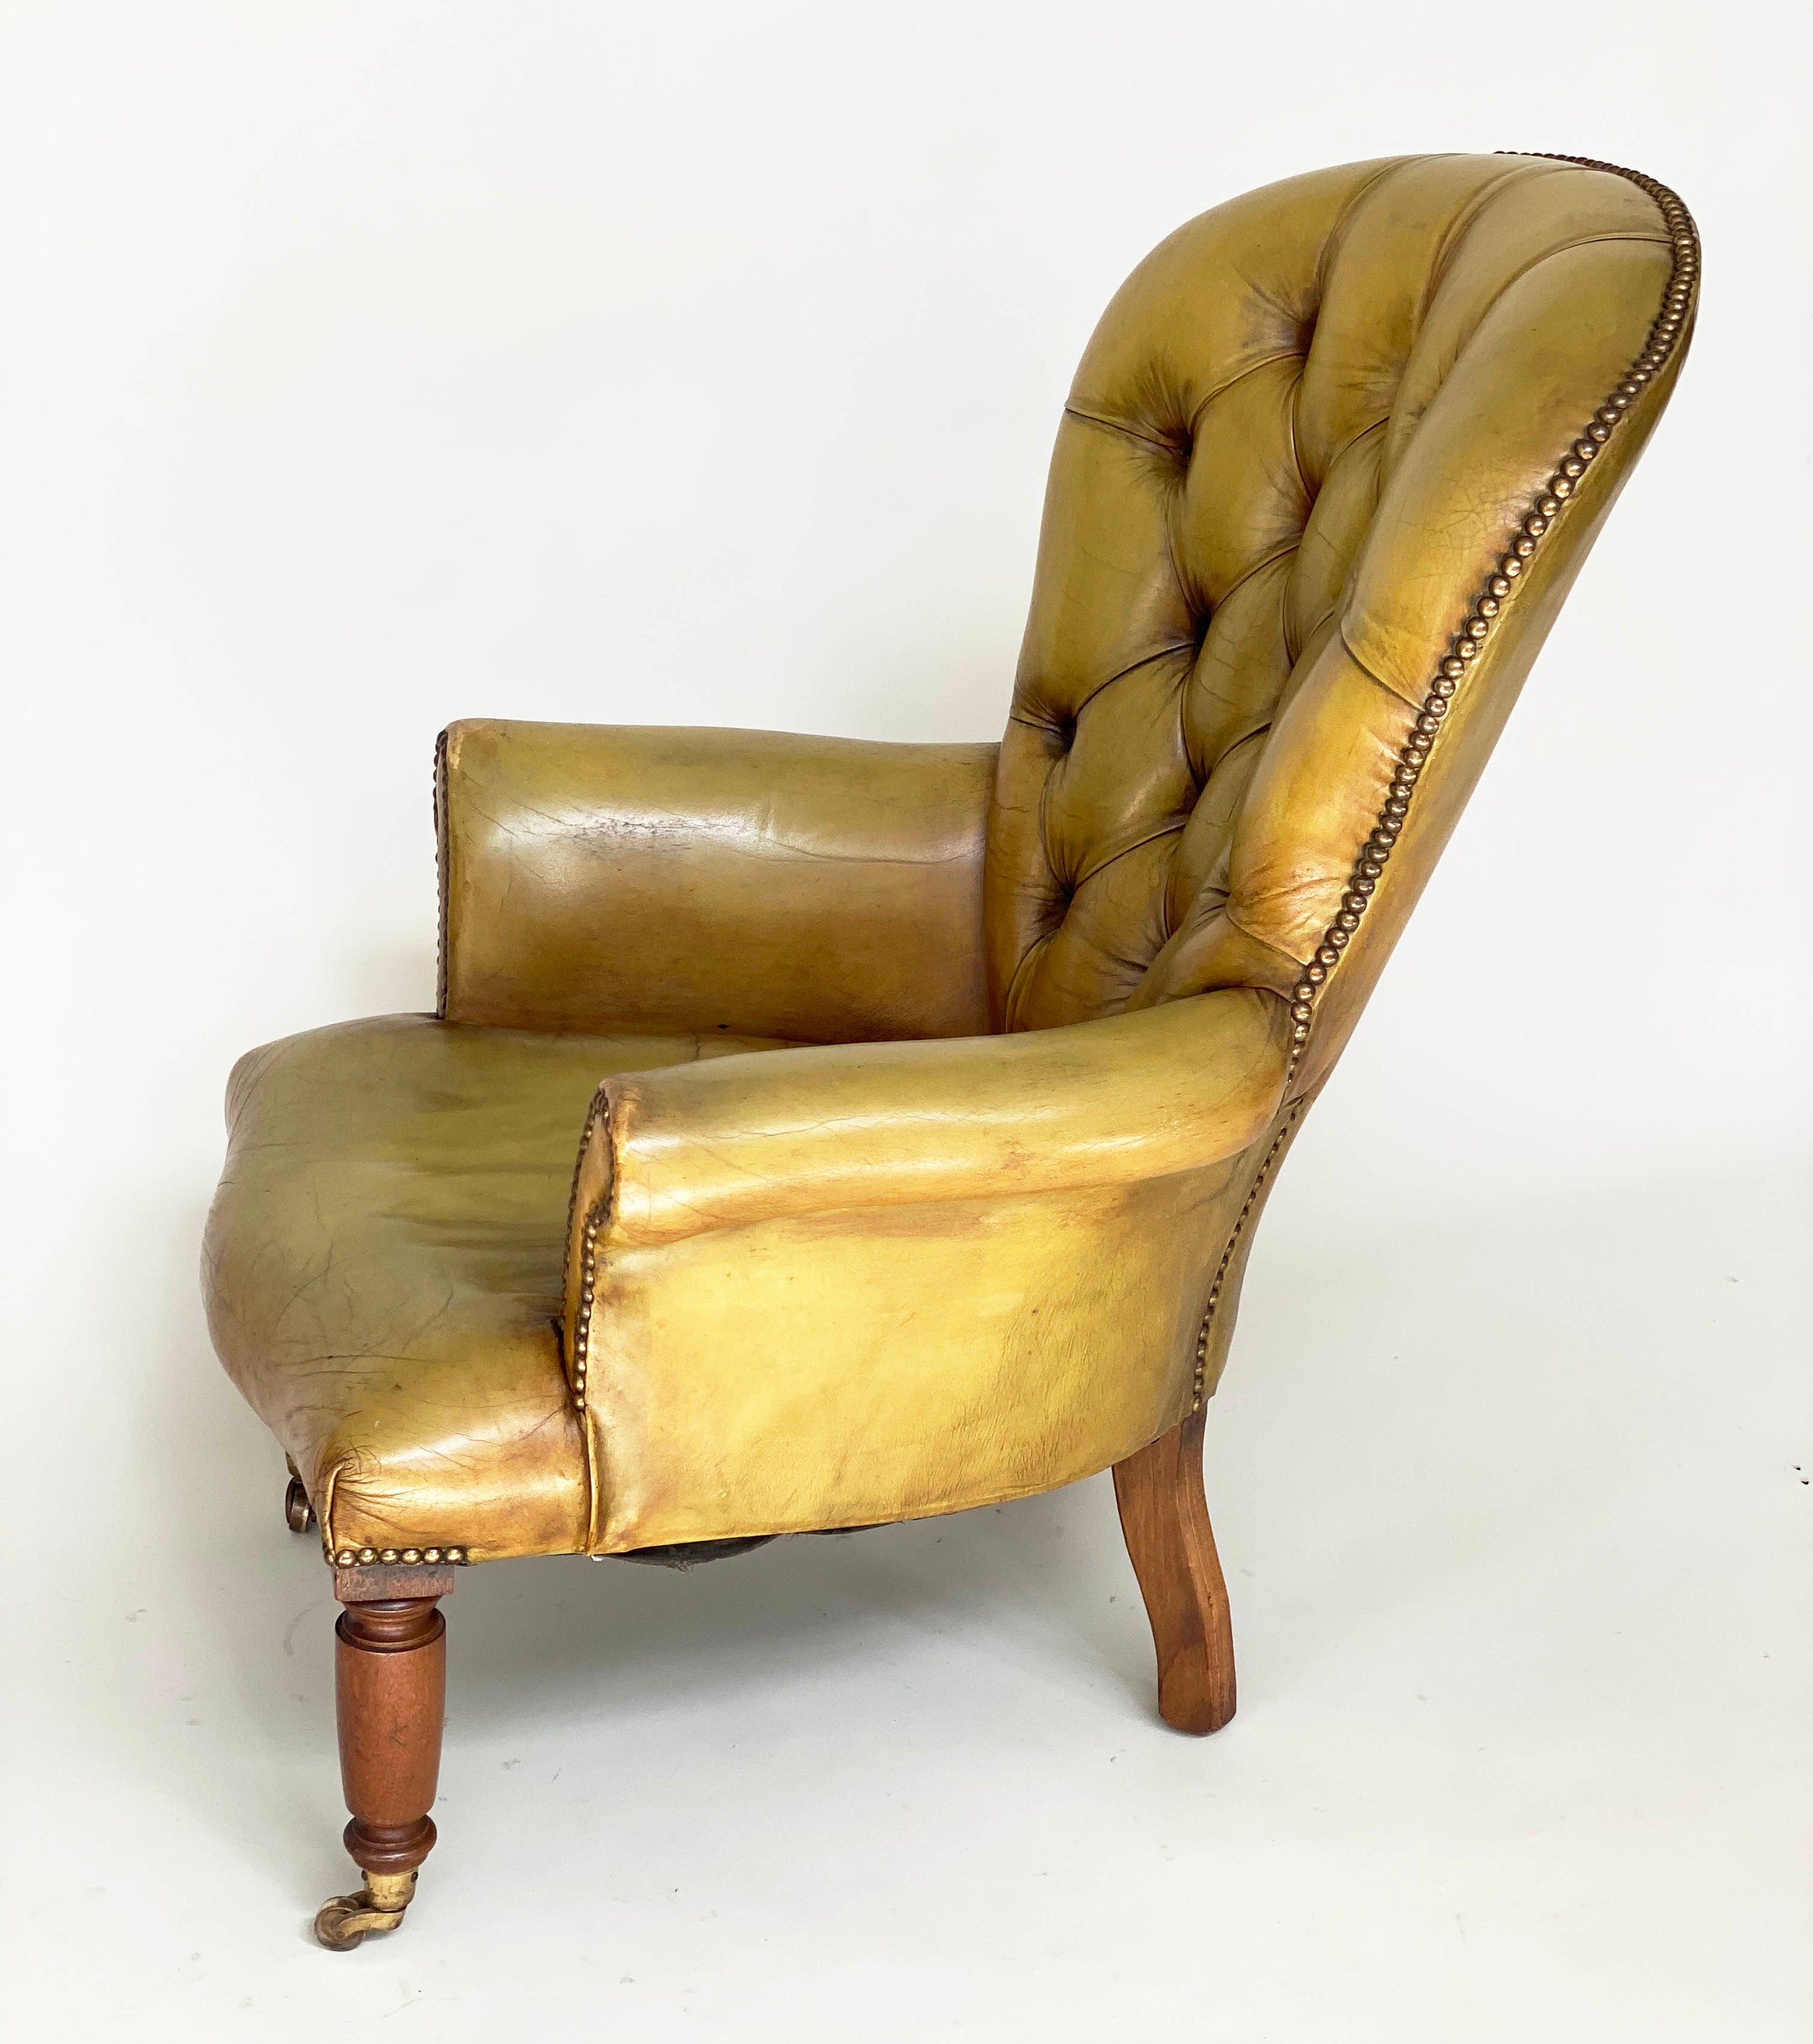 LIBRARY ARMCHAIR, Edwardian mahogany with brass studded and deep buttoned green leather upholstery - Image 10 of 10